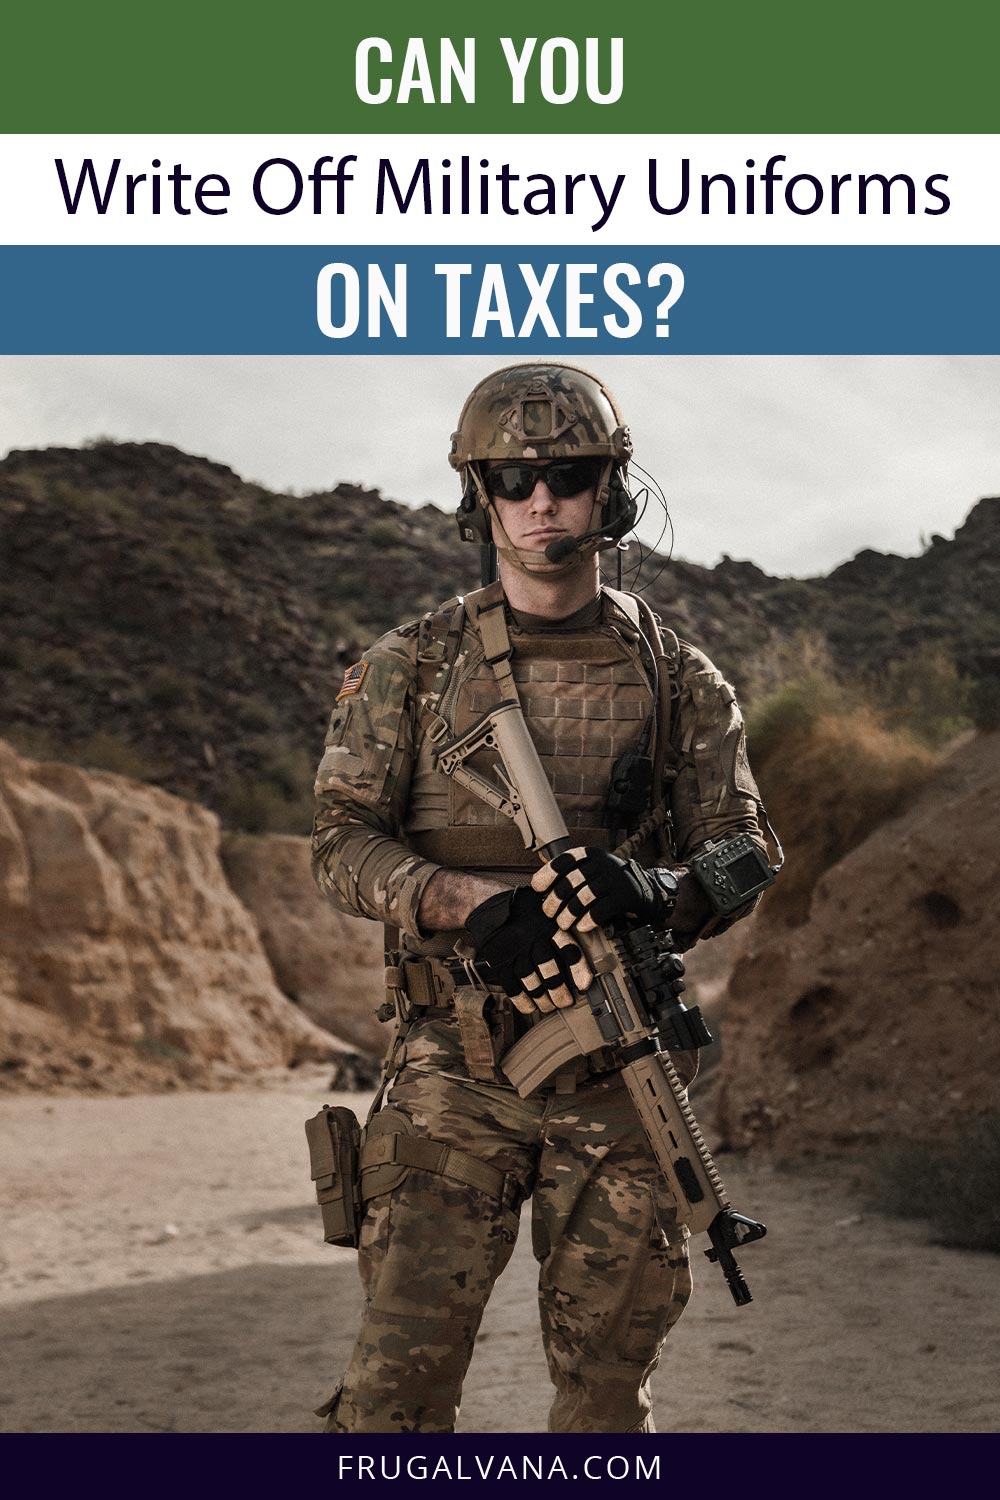 Can You Write Off Military Uniforms on Taxes? Frugalvana